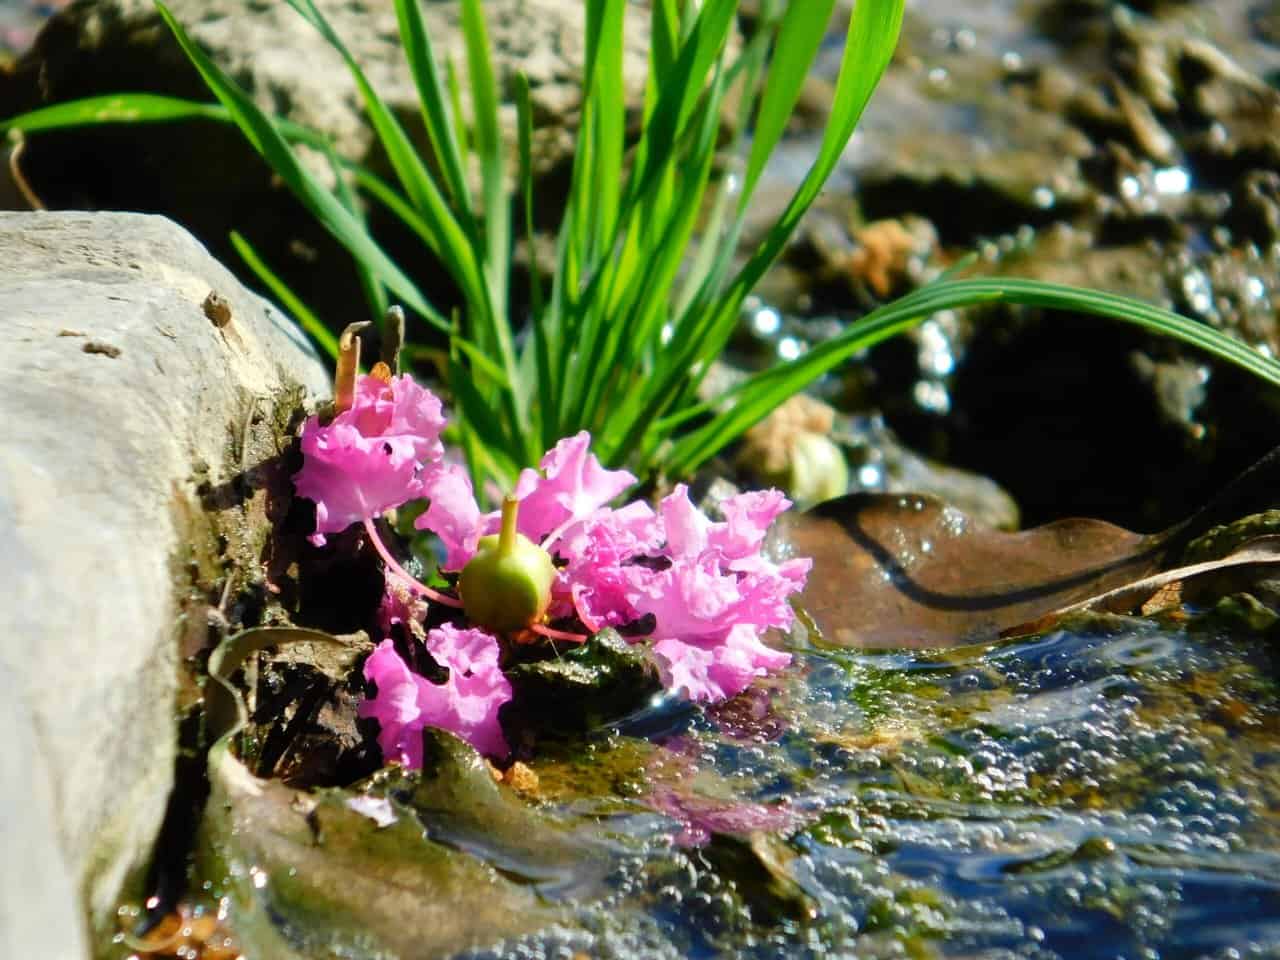 Flowers inside of the water.